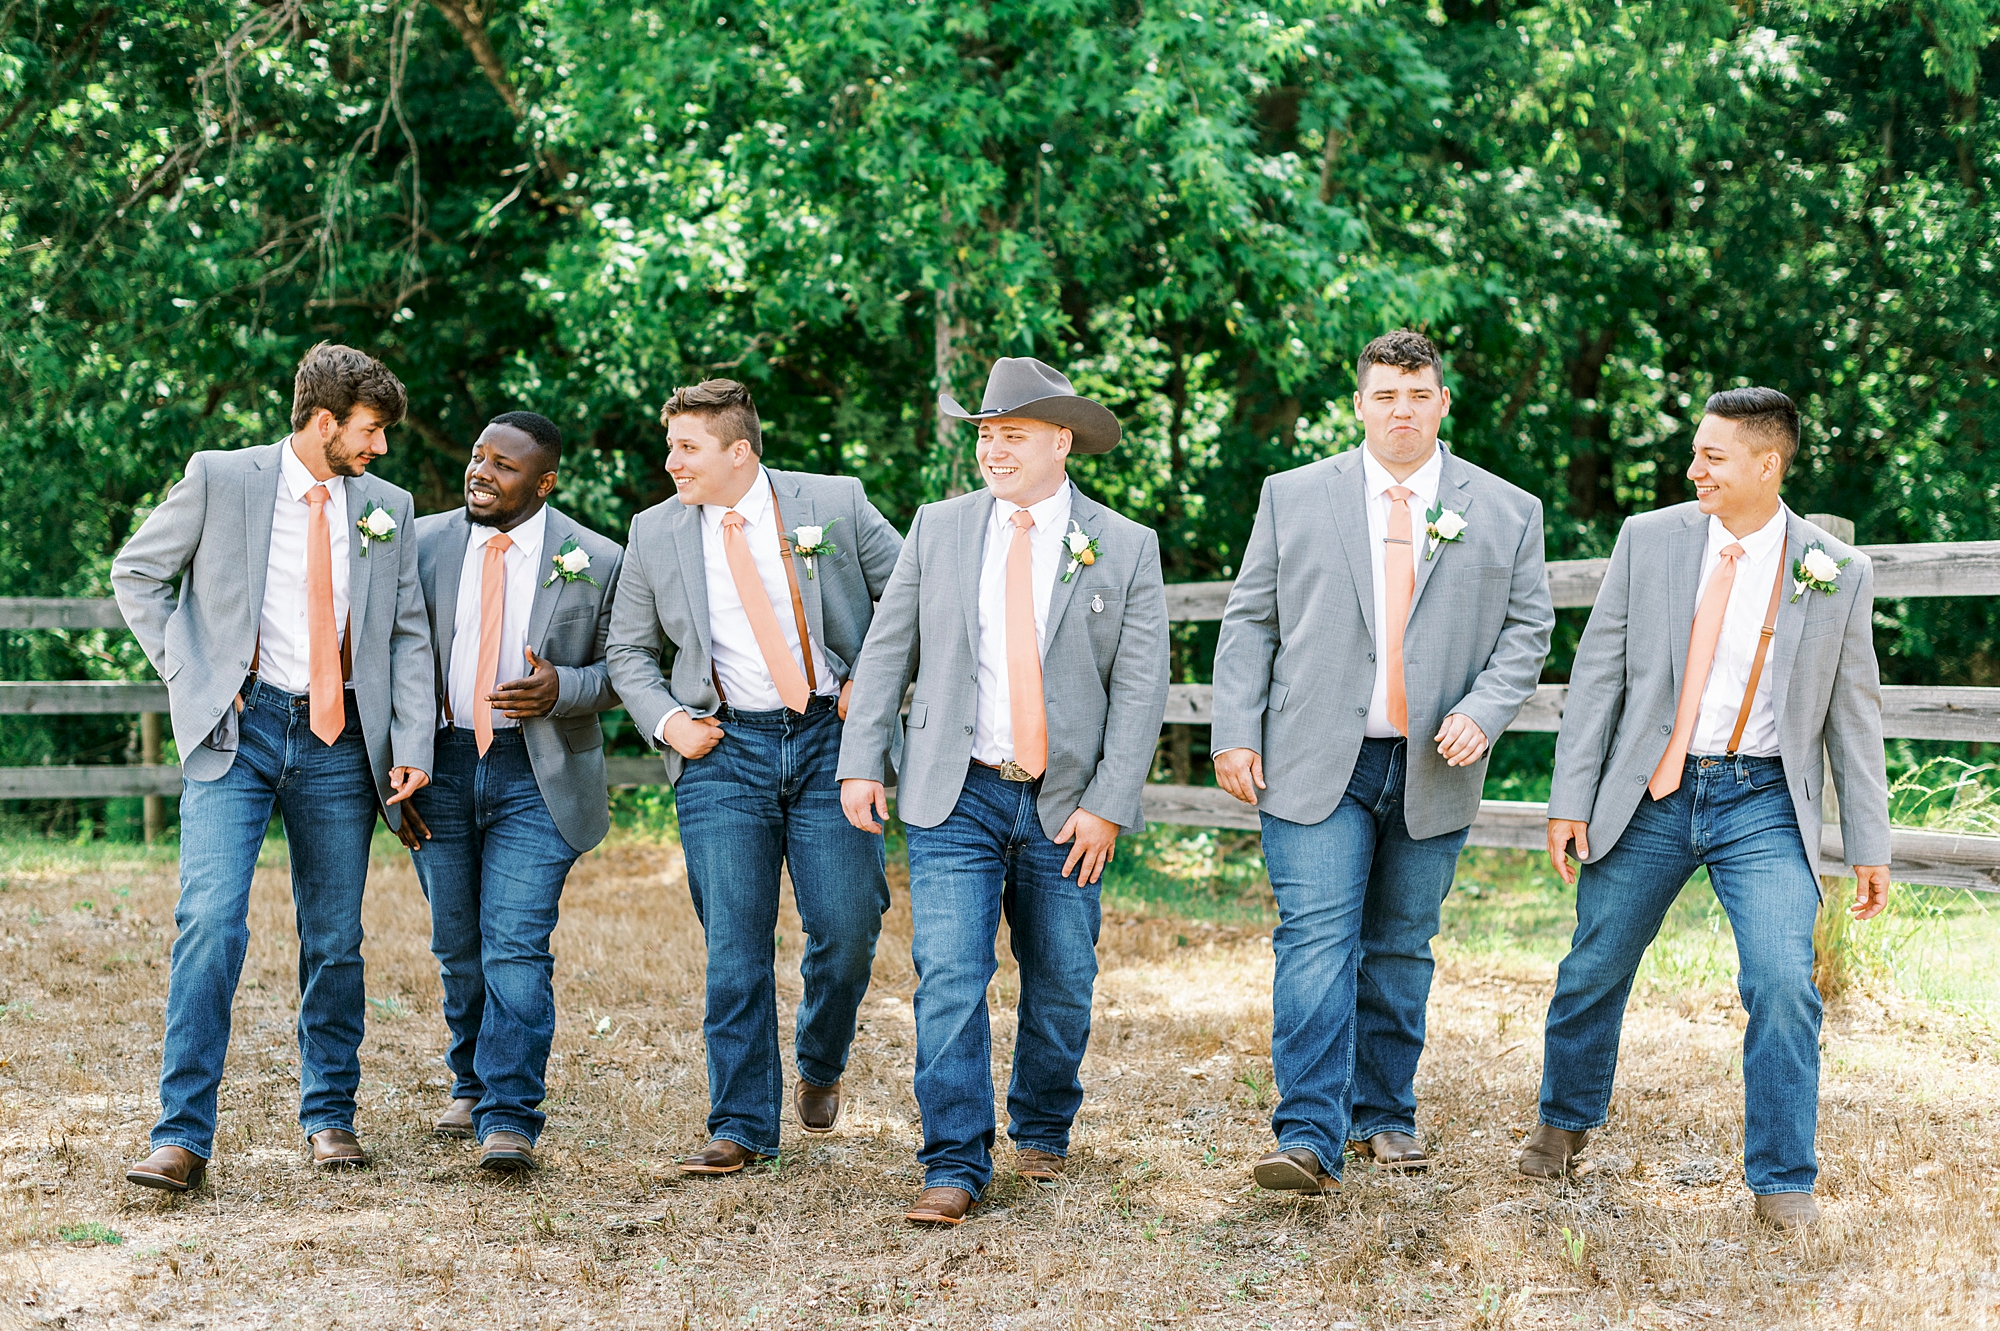 groom walks with groomsmen in suit jackets with jeans